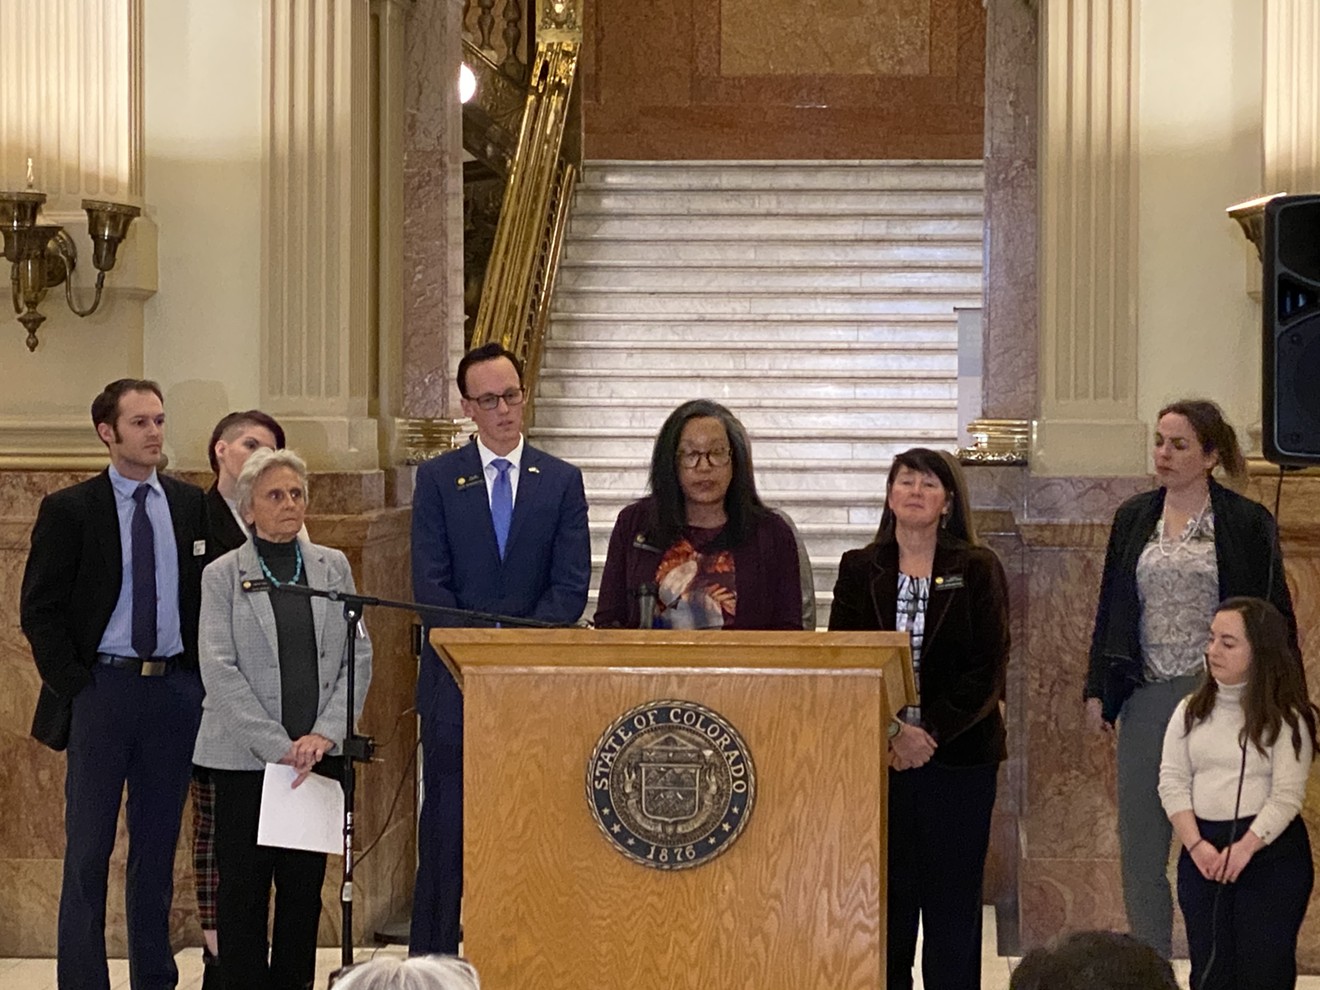 Colorado Democrats unveiled the Colorado Prescription Drug Transparency Act of 2020 at the Capitol on January 21.